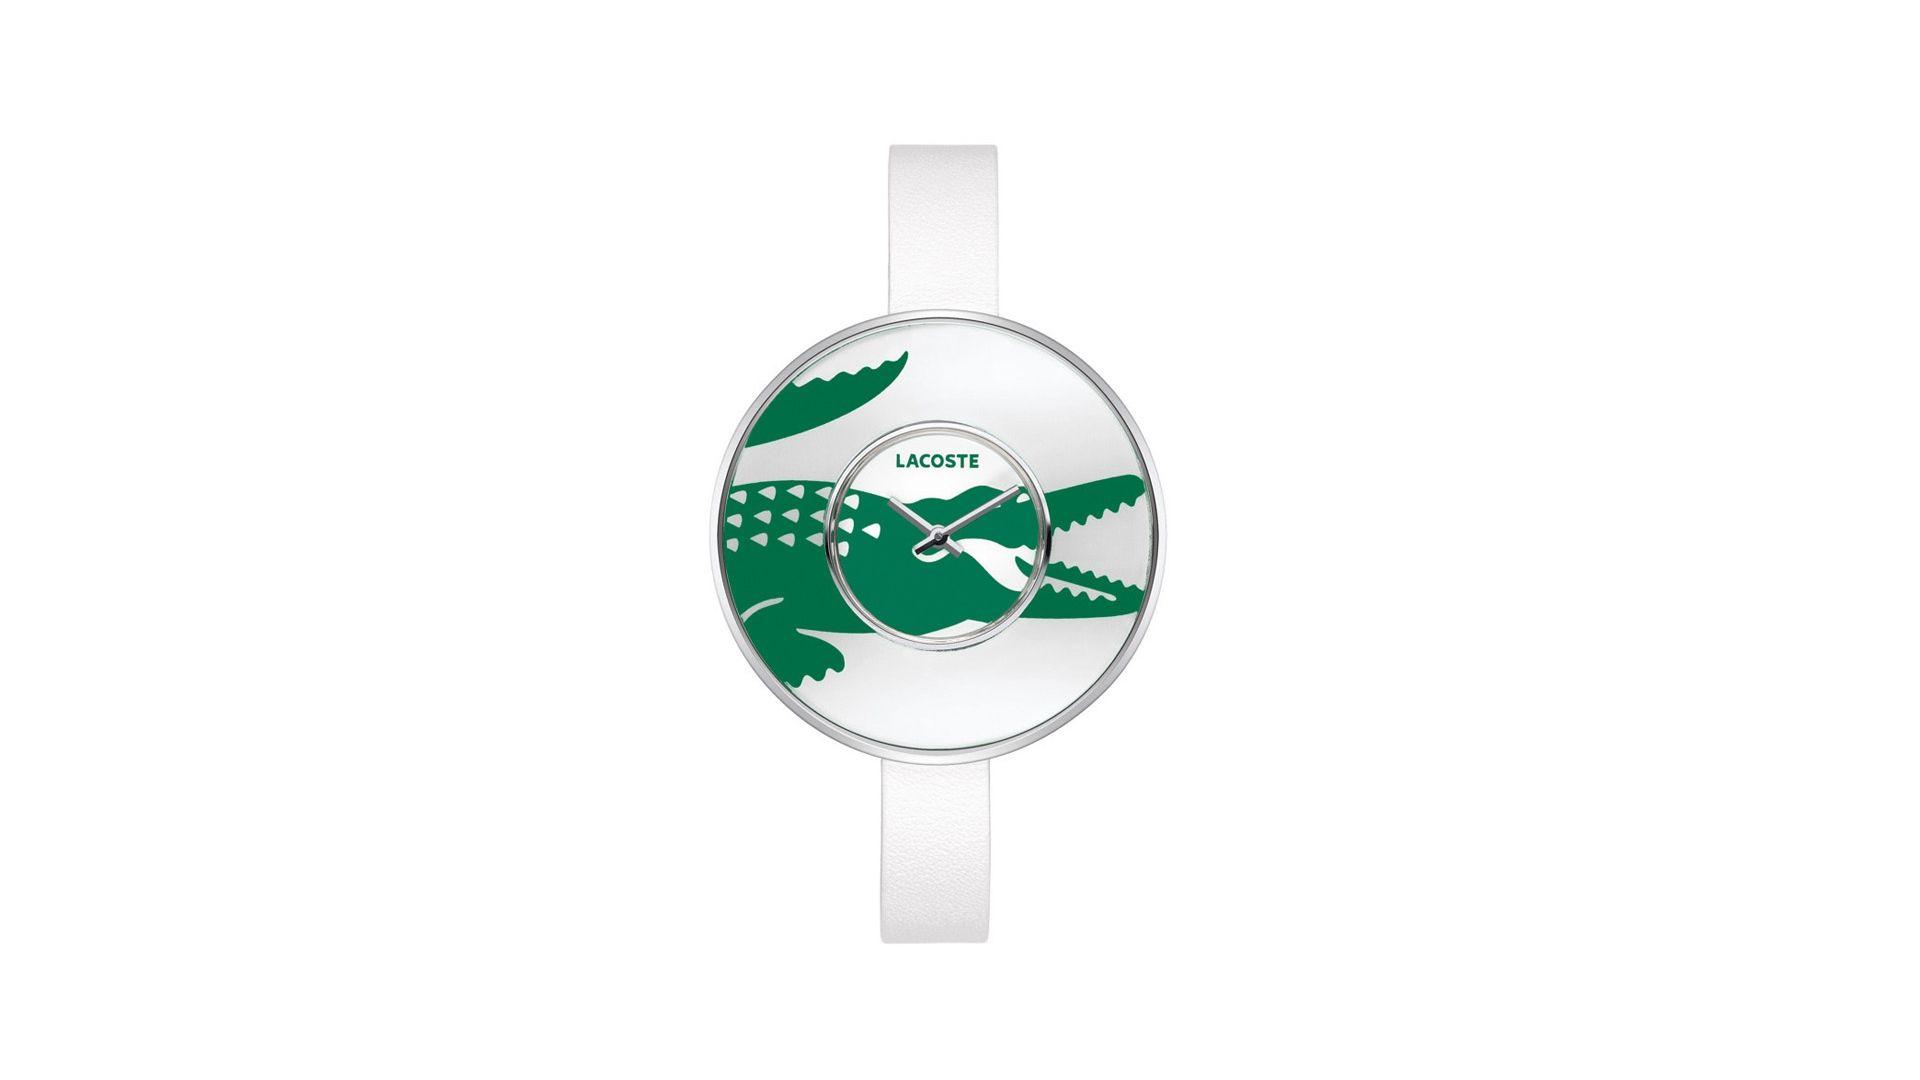 Download Wallpaper 1920x1080 lacoste, brand, watches, stylish